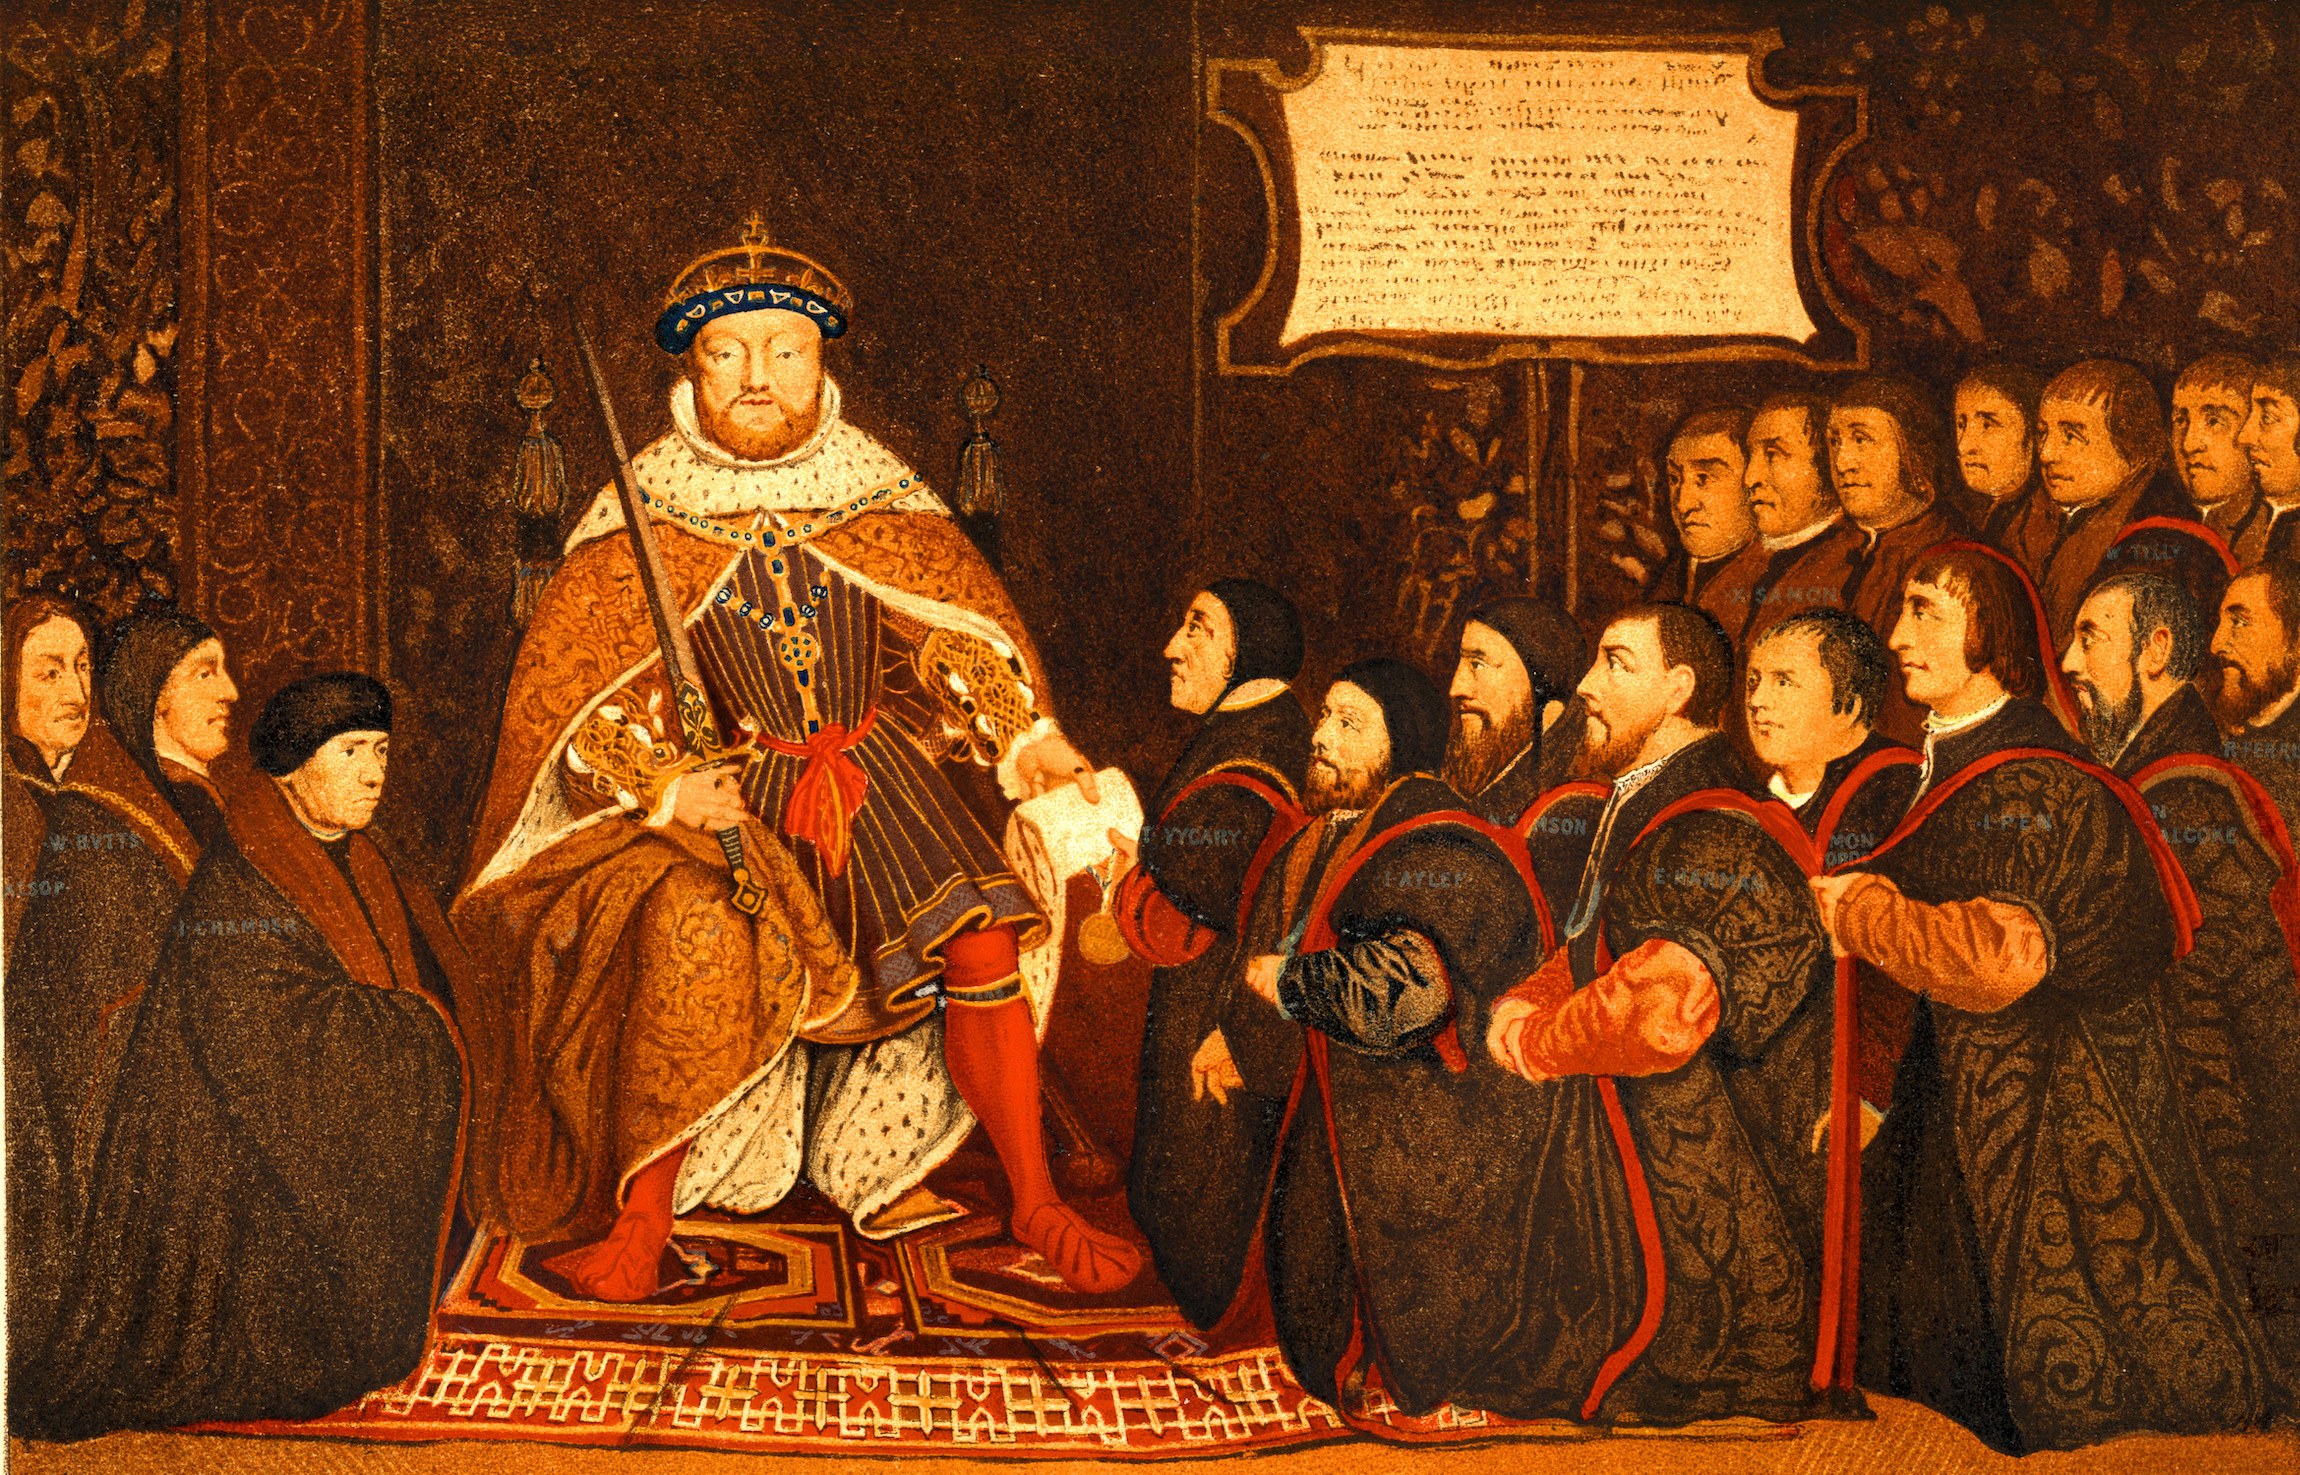 A rendering of Henry VIII and his court